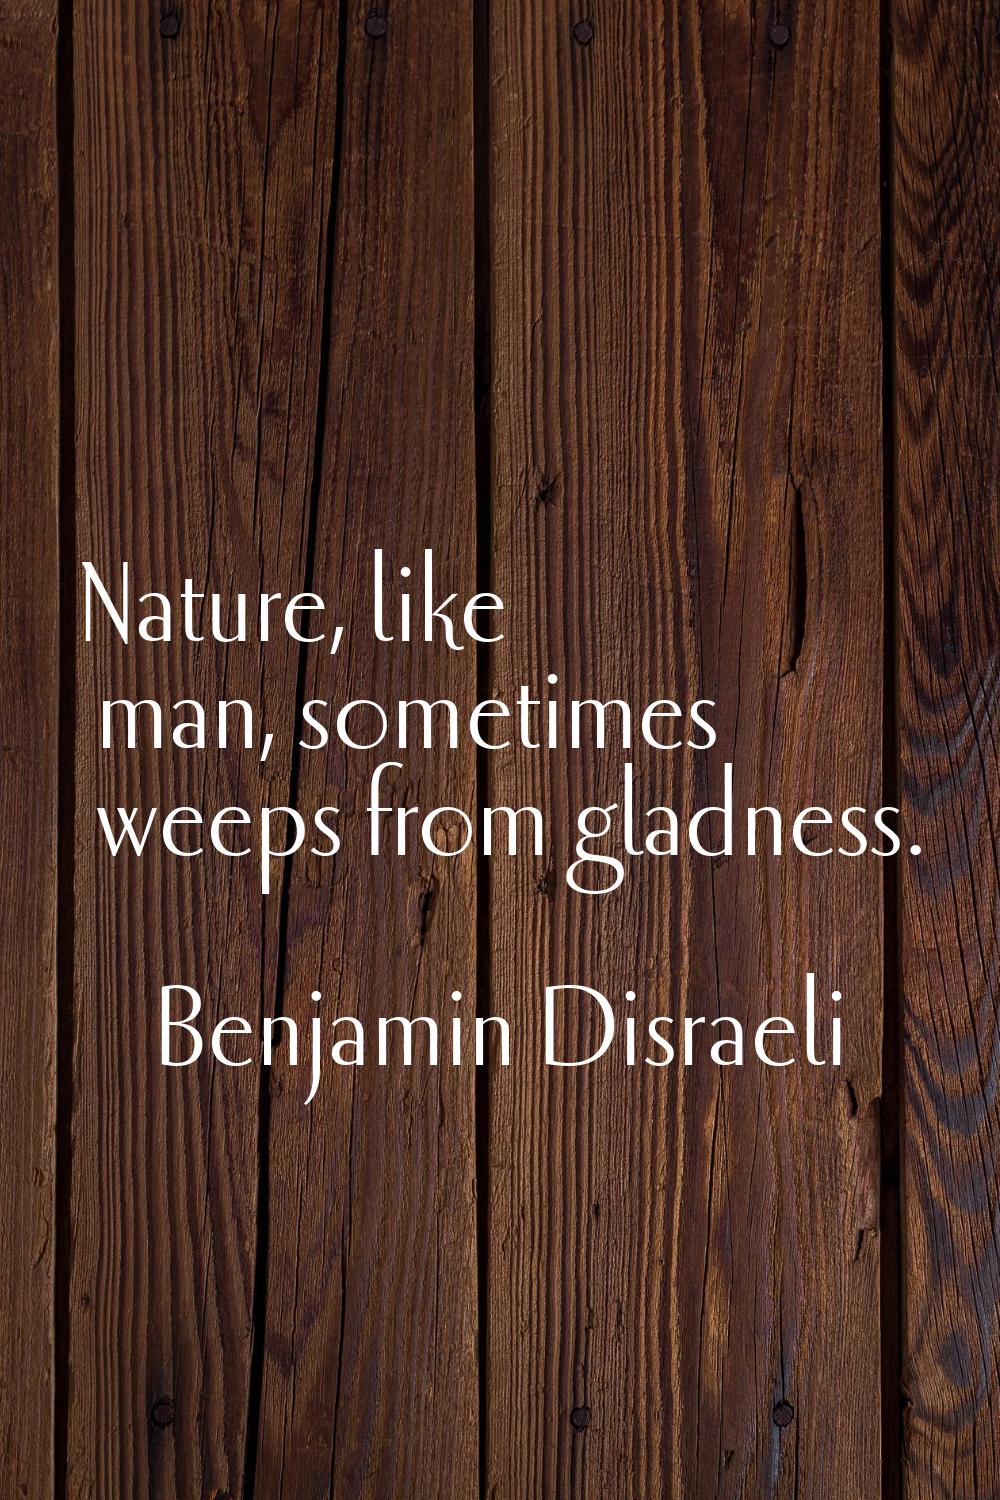 Nature, like man, sometimes weeps from gladness.